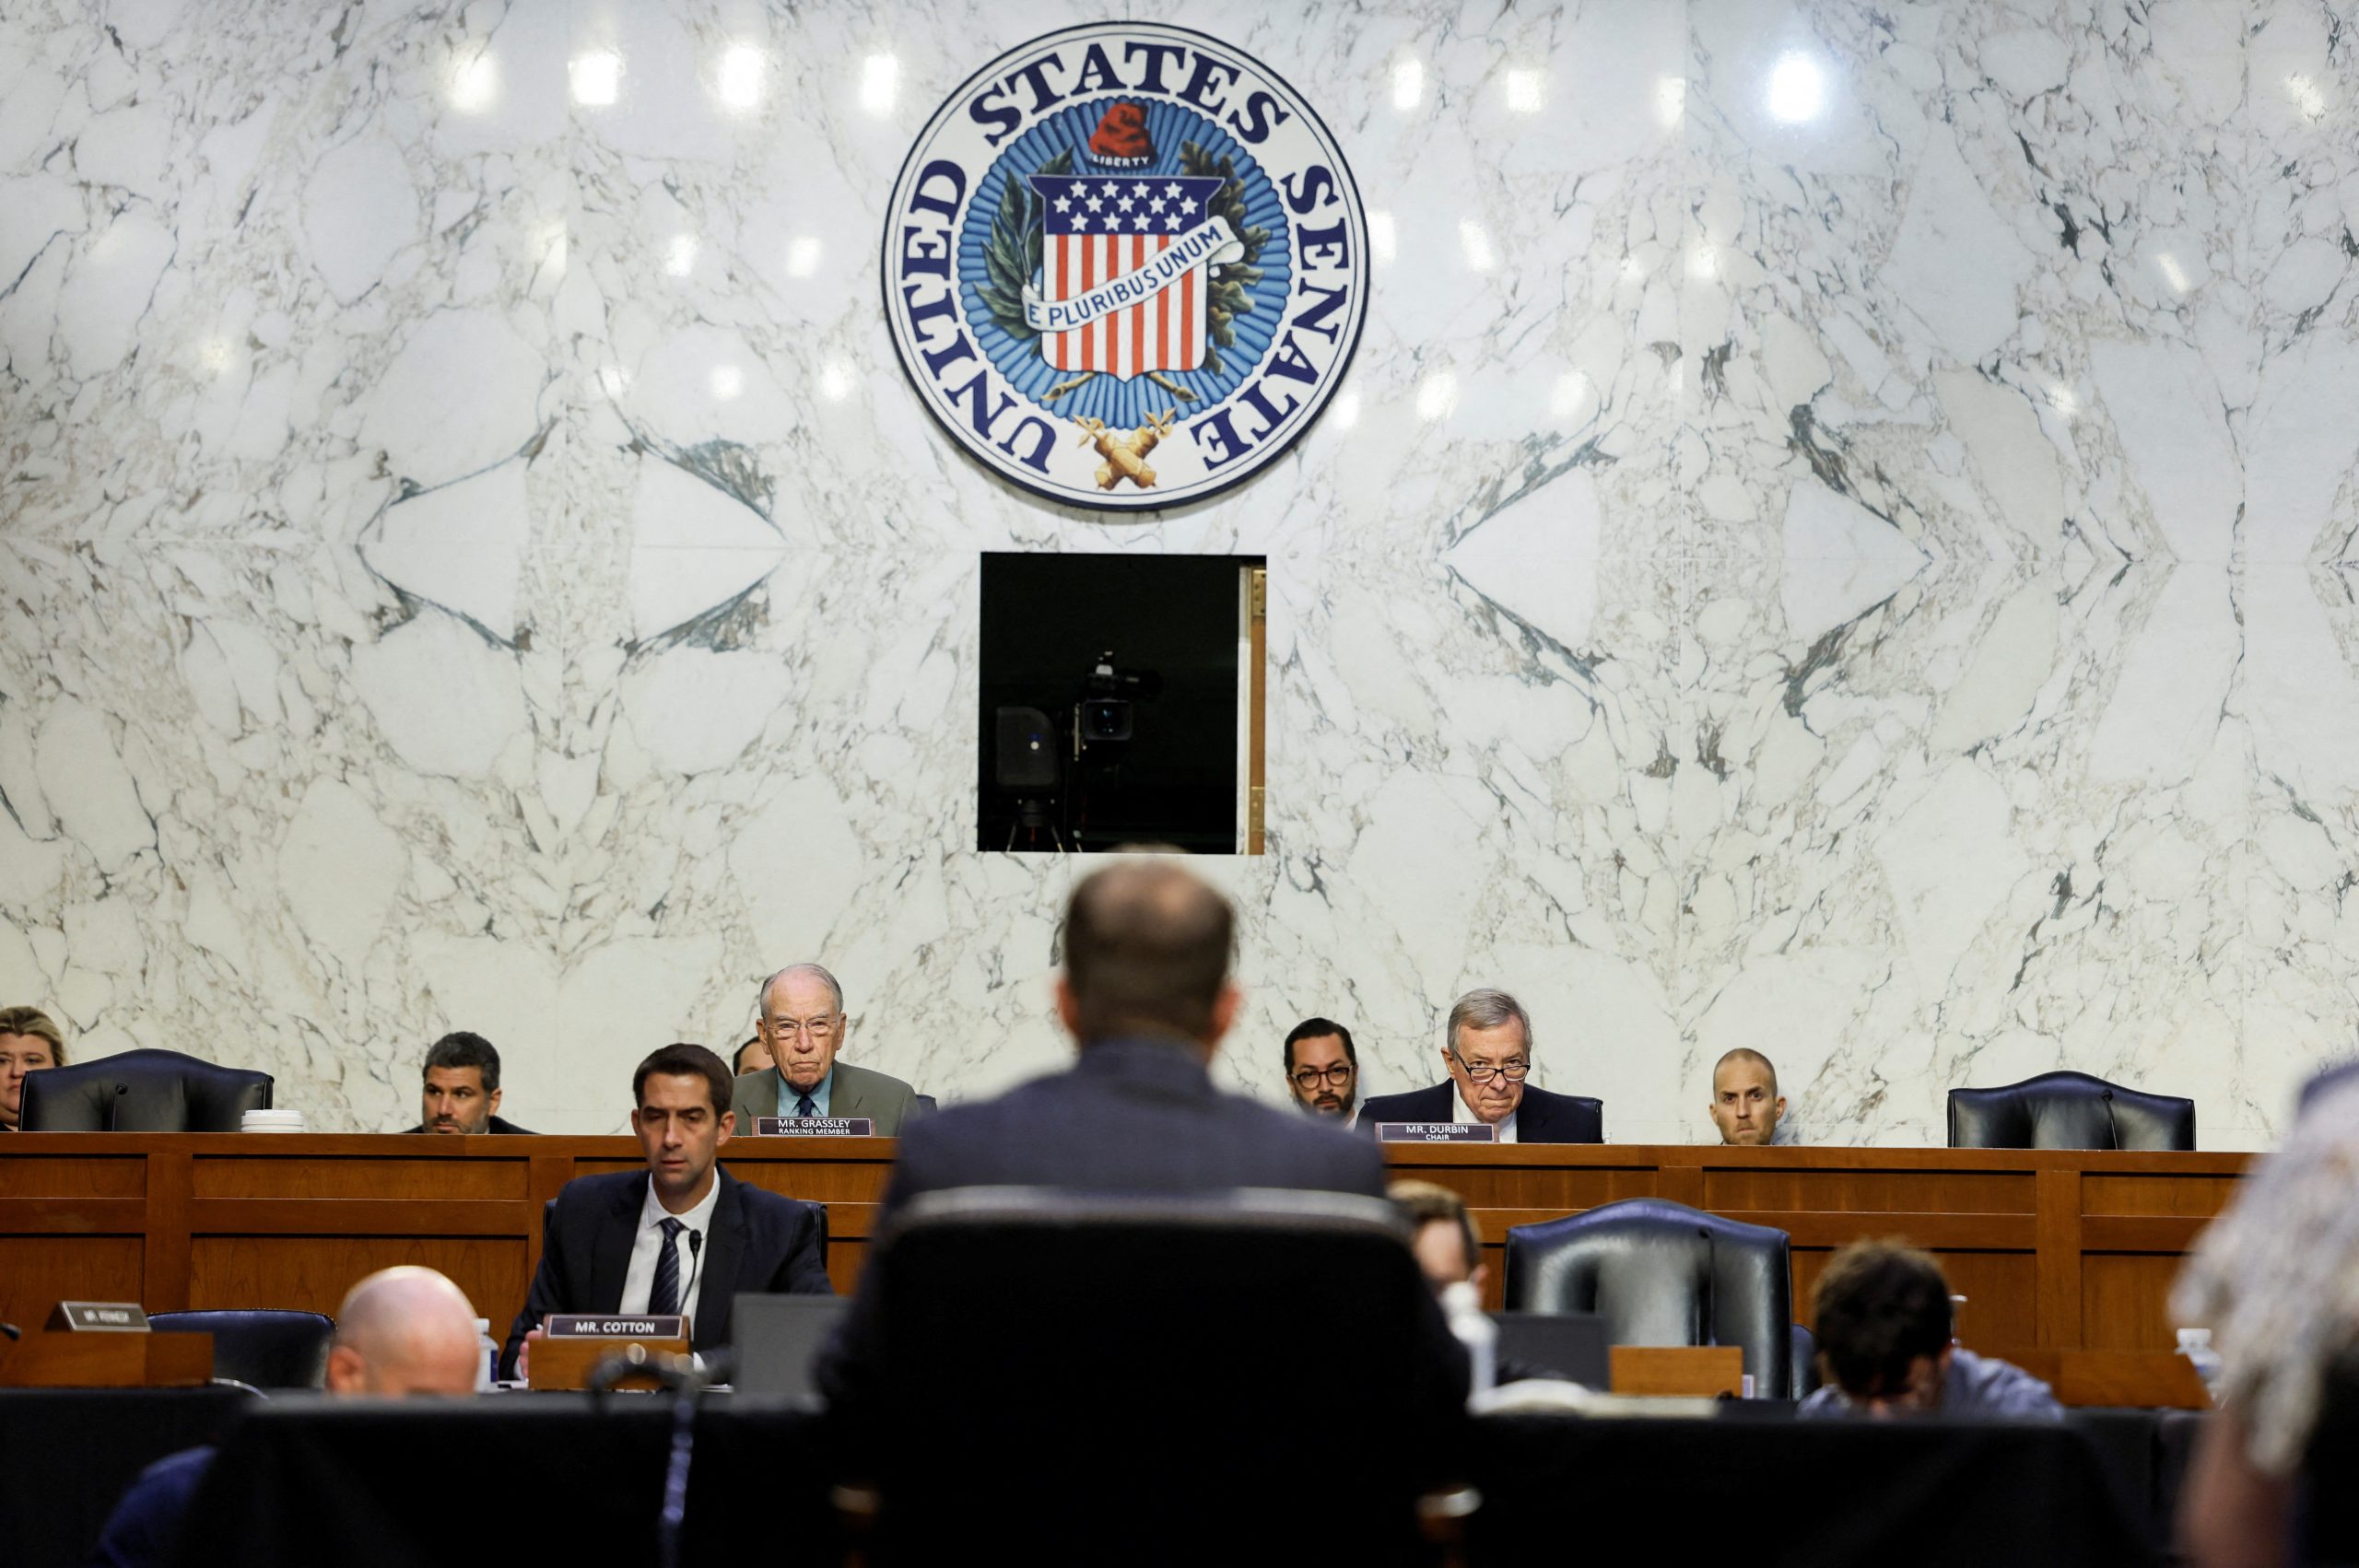 Twitter Inc.'s former security chief Peiter "Mudge" Zatko testifies before a Senate Judiciary Committee hearing to discuss allegations from his whistleblower complaint that the social media company misled regulators, on Capitol Hill in Washington, U.S., September 13, 2022. REUTERS/Evelyn Hockstein